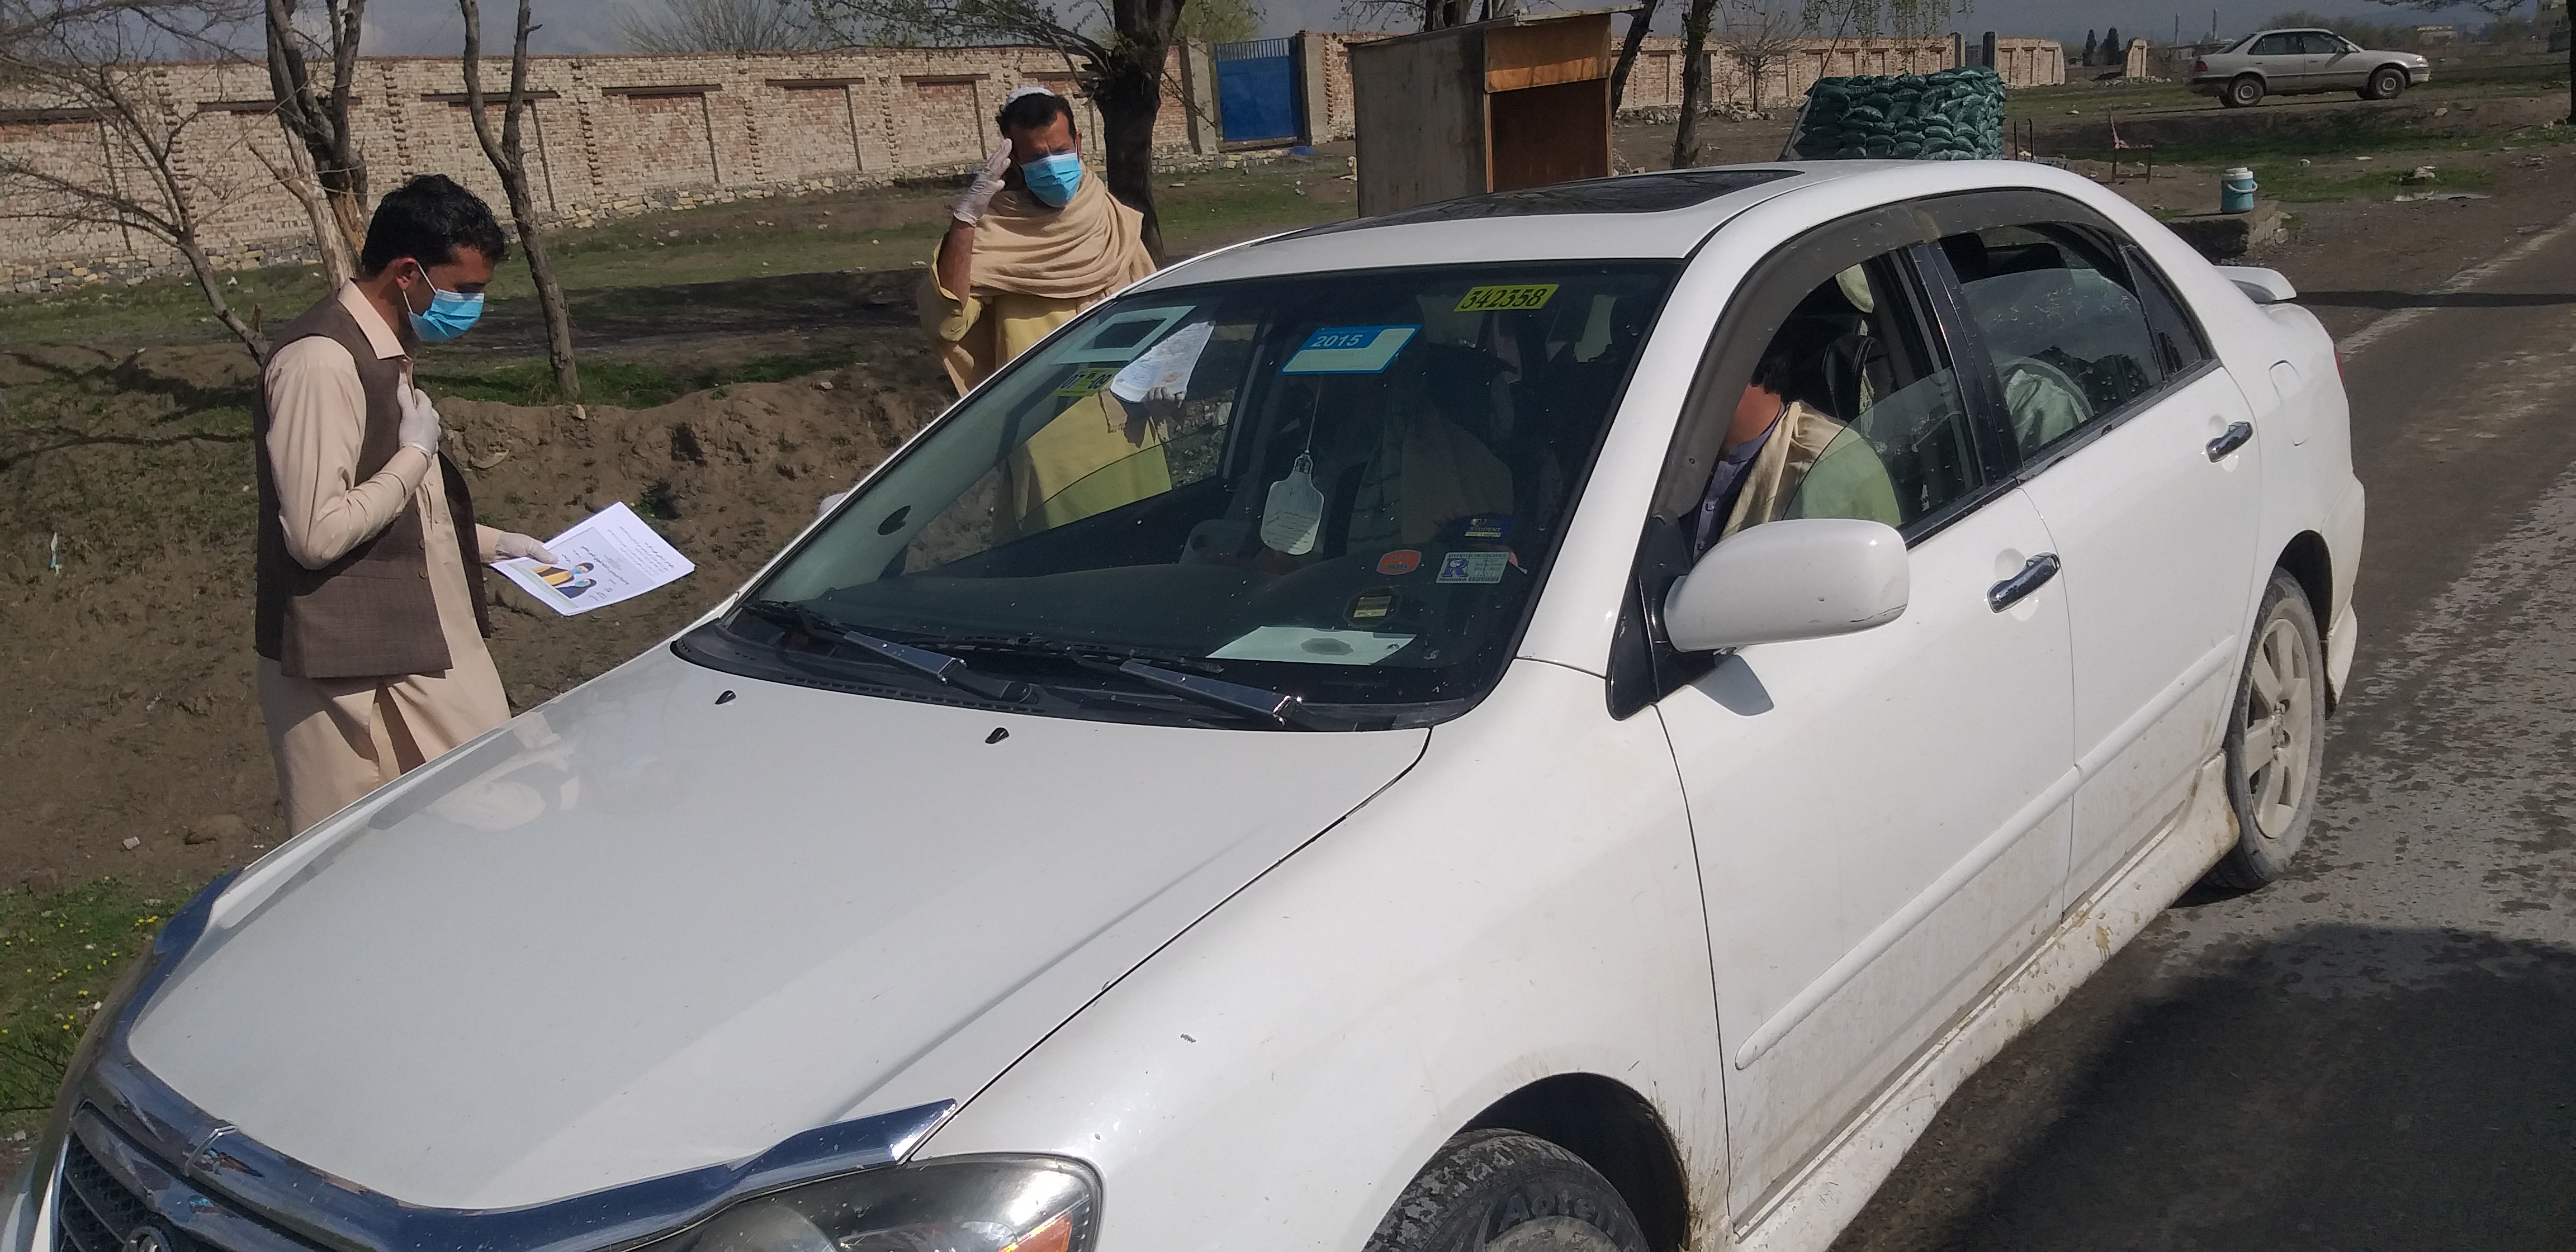 Activists in Khost hand out information leaflets about COVID-19 to passing drivers (photo: Mohammad Zaman)